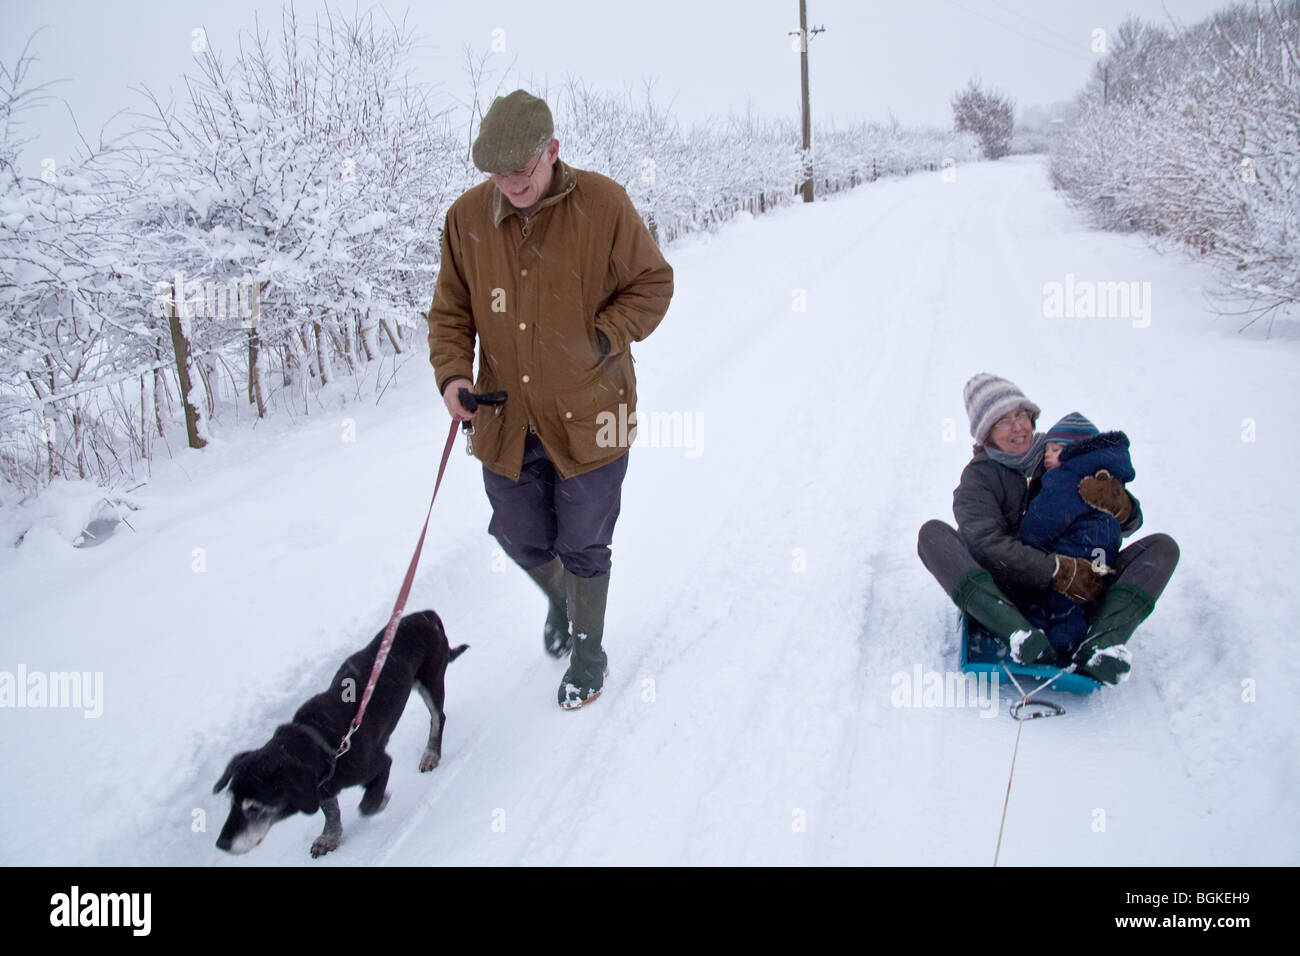 Sledging or tobogganing in the snow, Hampshire, England Stock Photo